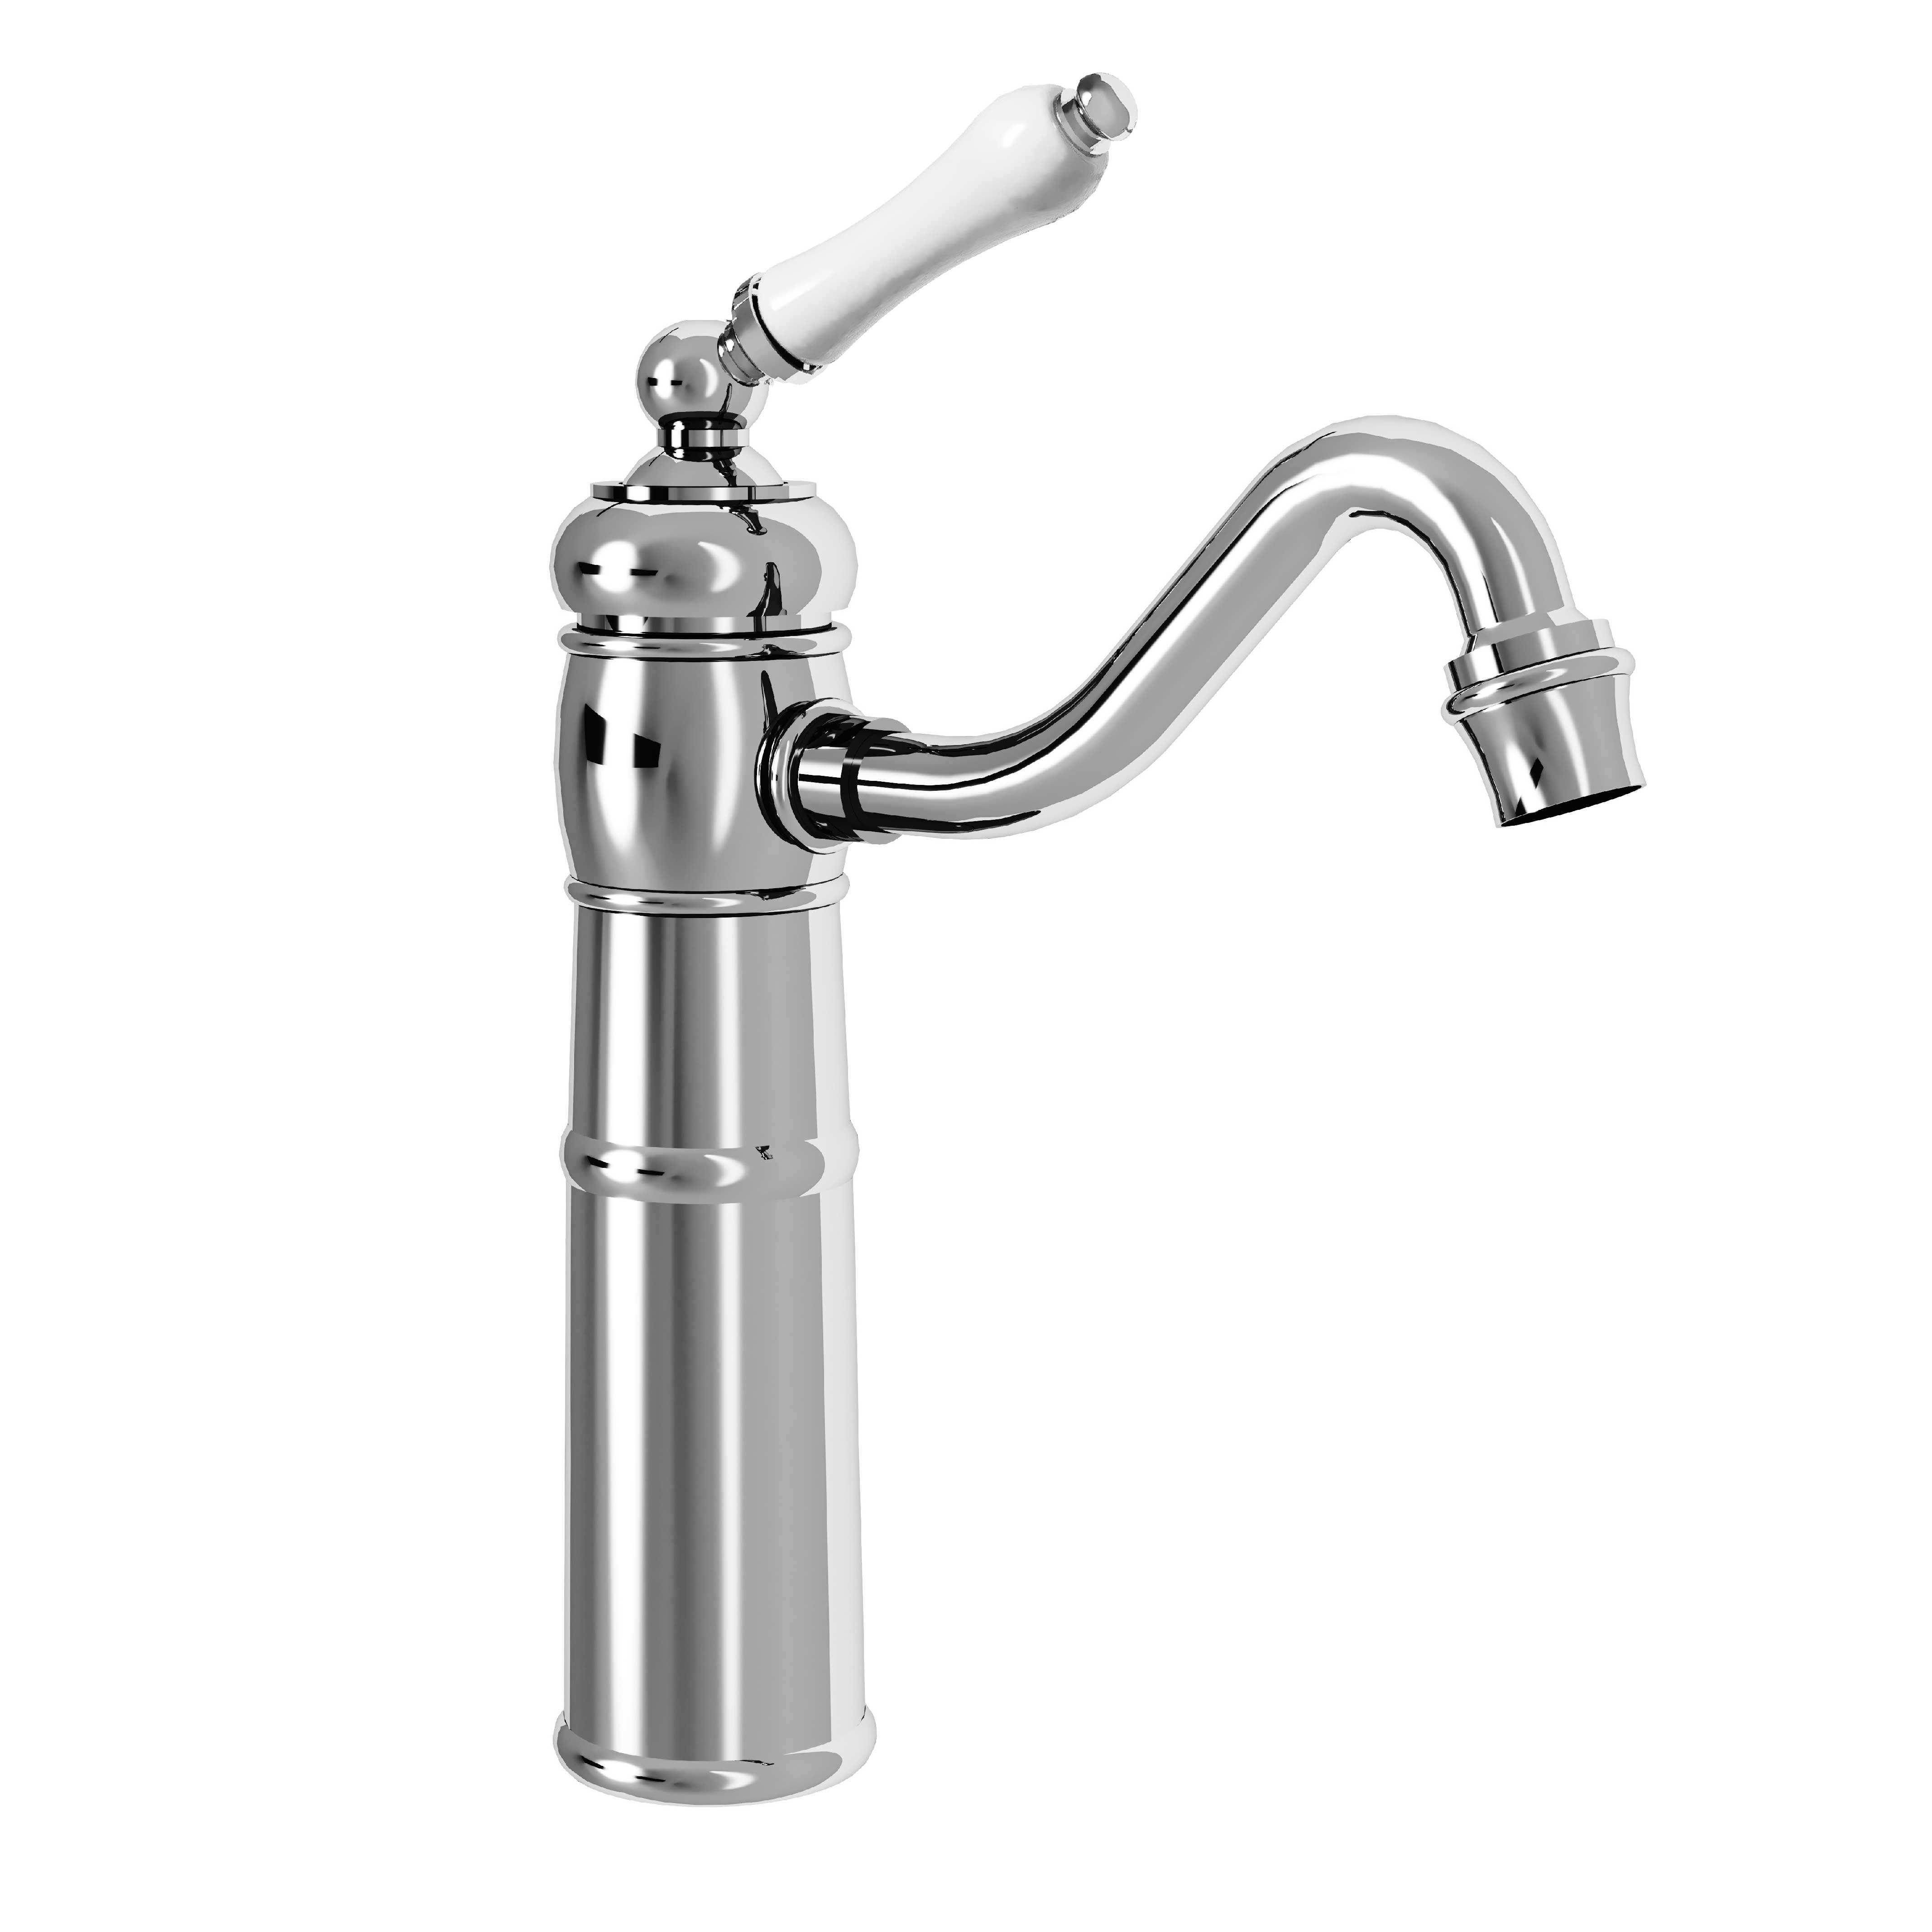 M04-1101MB Heightened lever basin mixer, H. 266mm